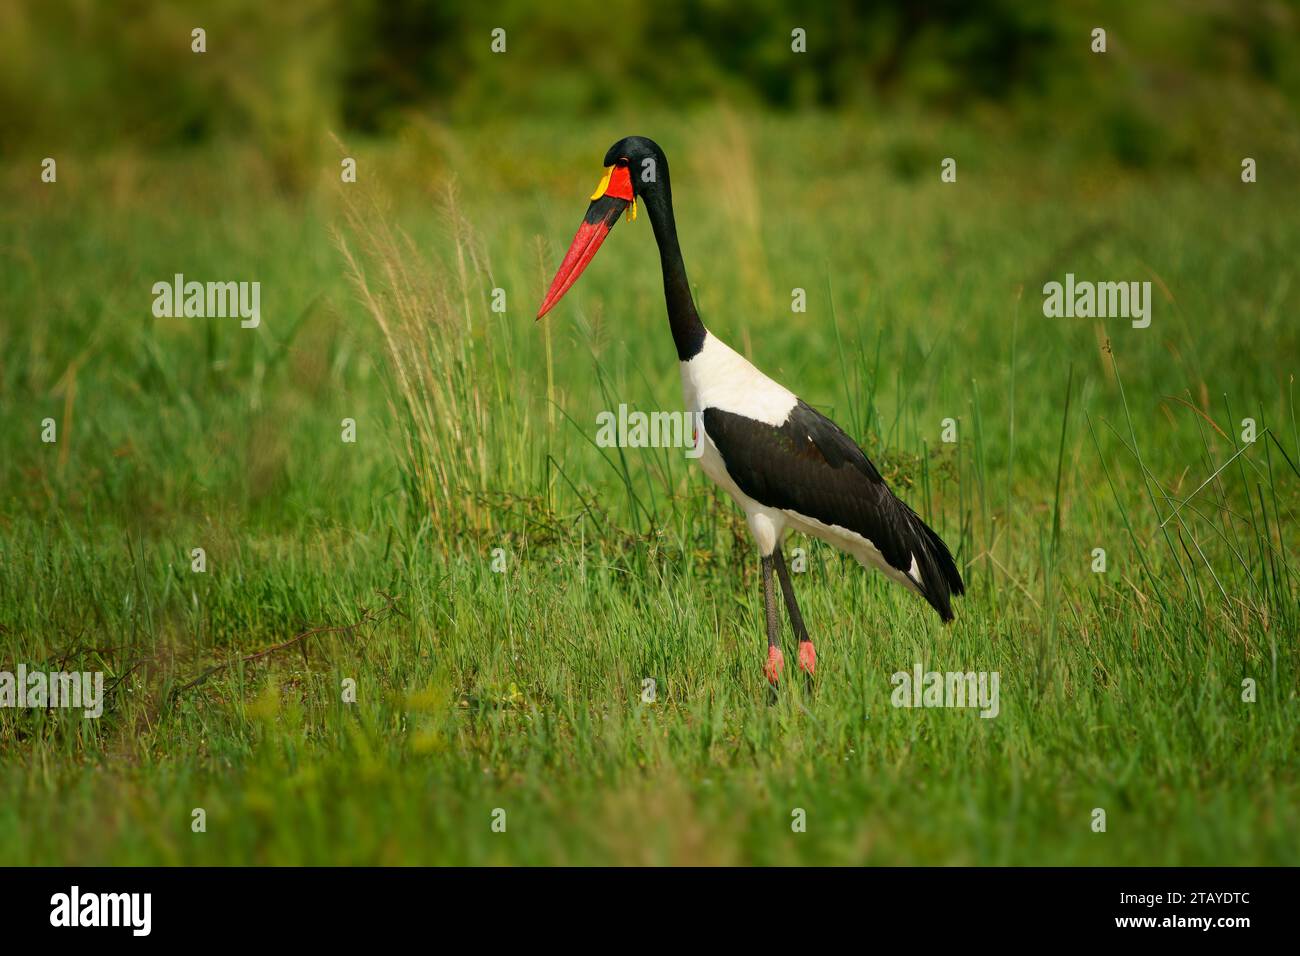 Saddle-billed Stork - Ephippiorhynchus senegalensis  or saddlebill, wading bird in stork in Ciconiidae, black and white back and red and yellow head. Stock Photo